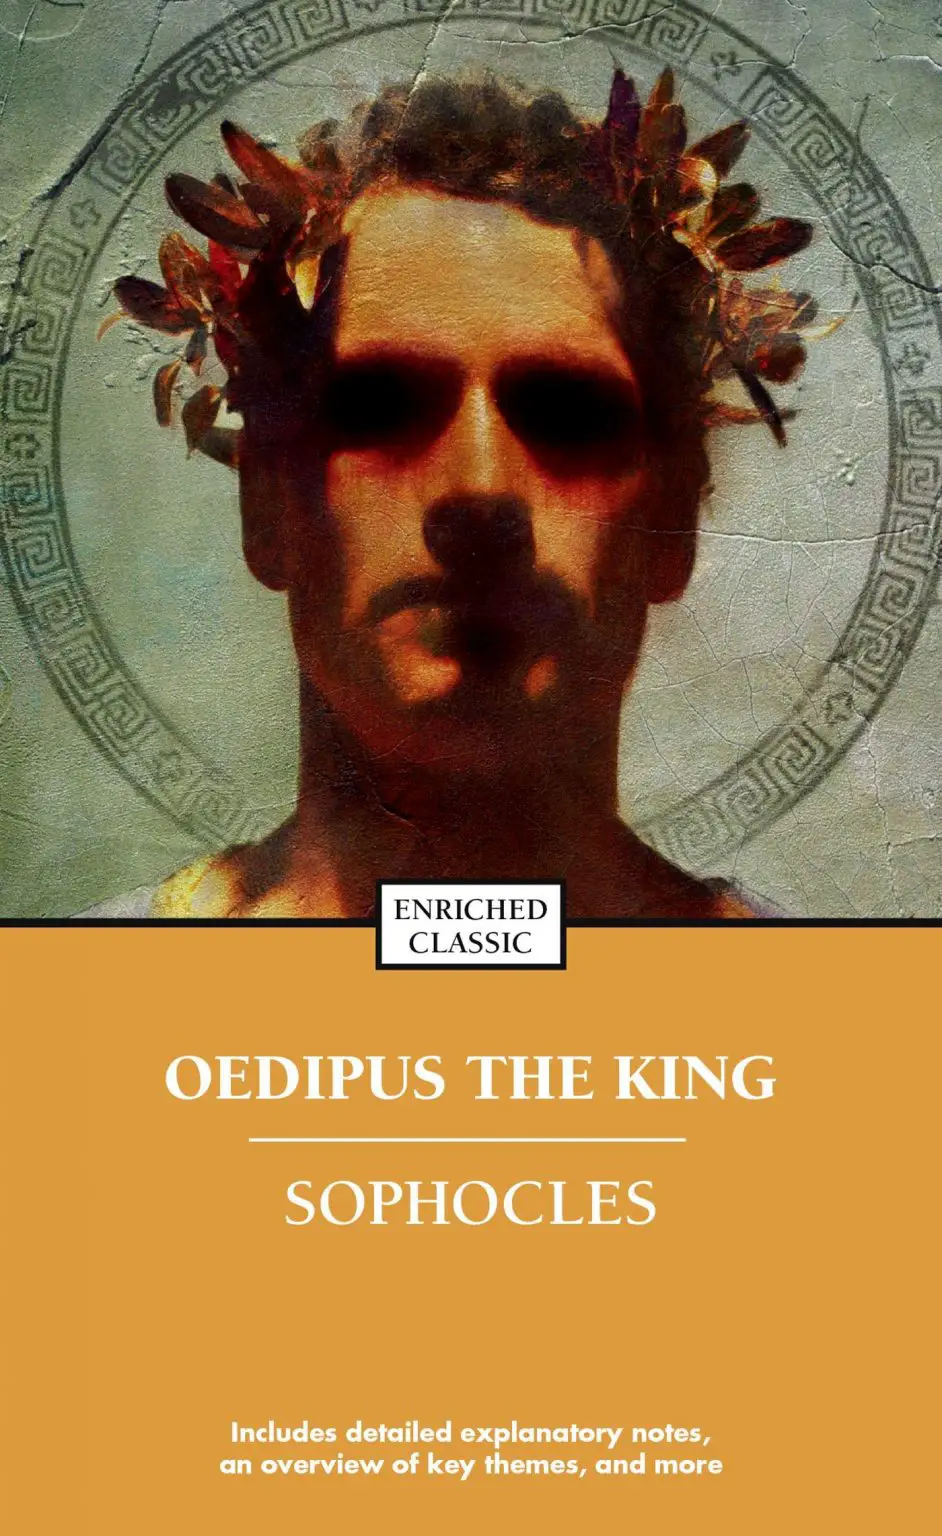 oedipus the king essay